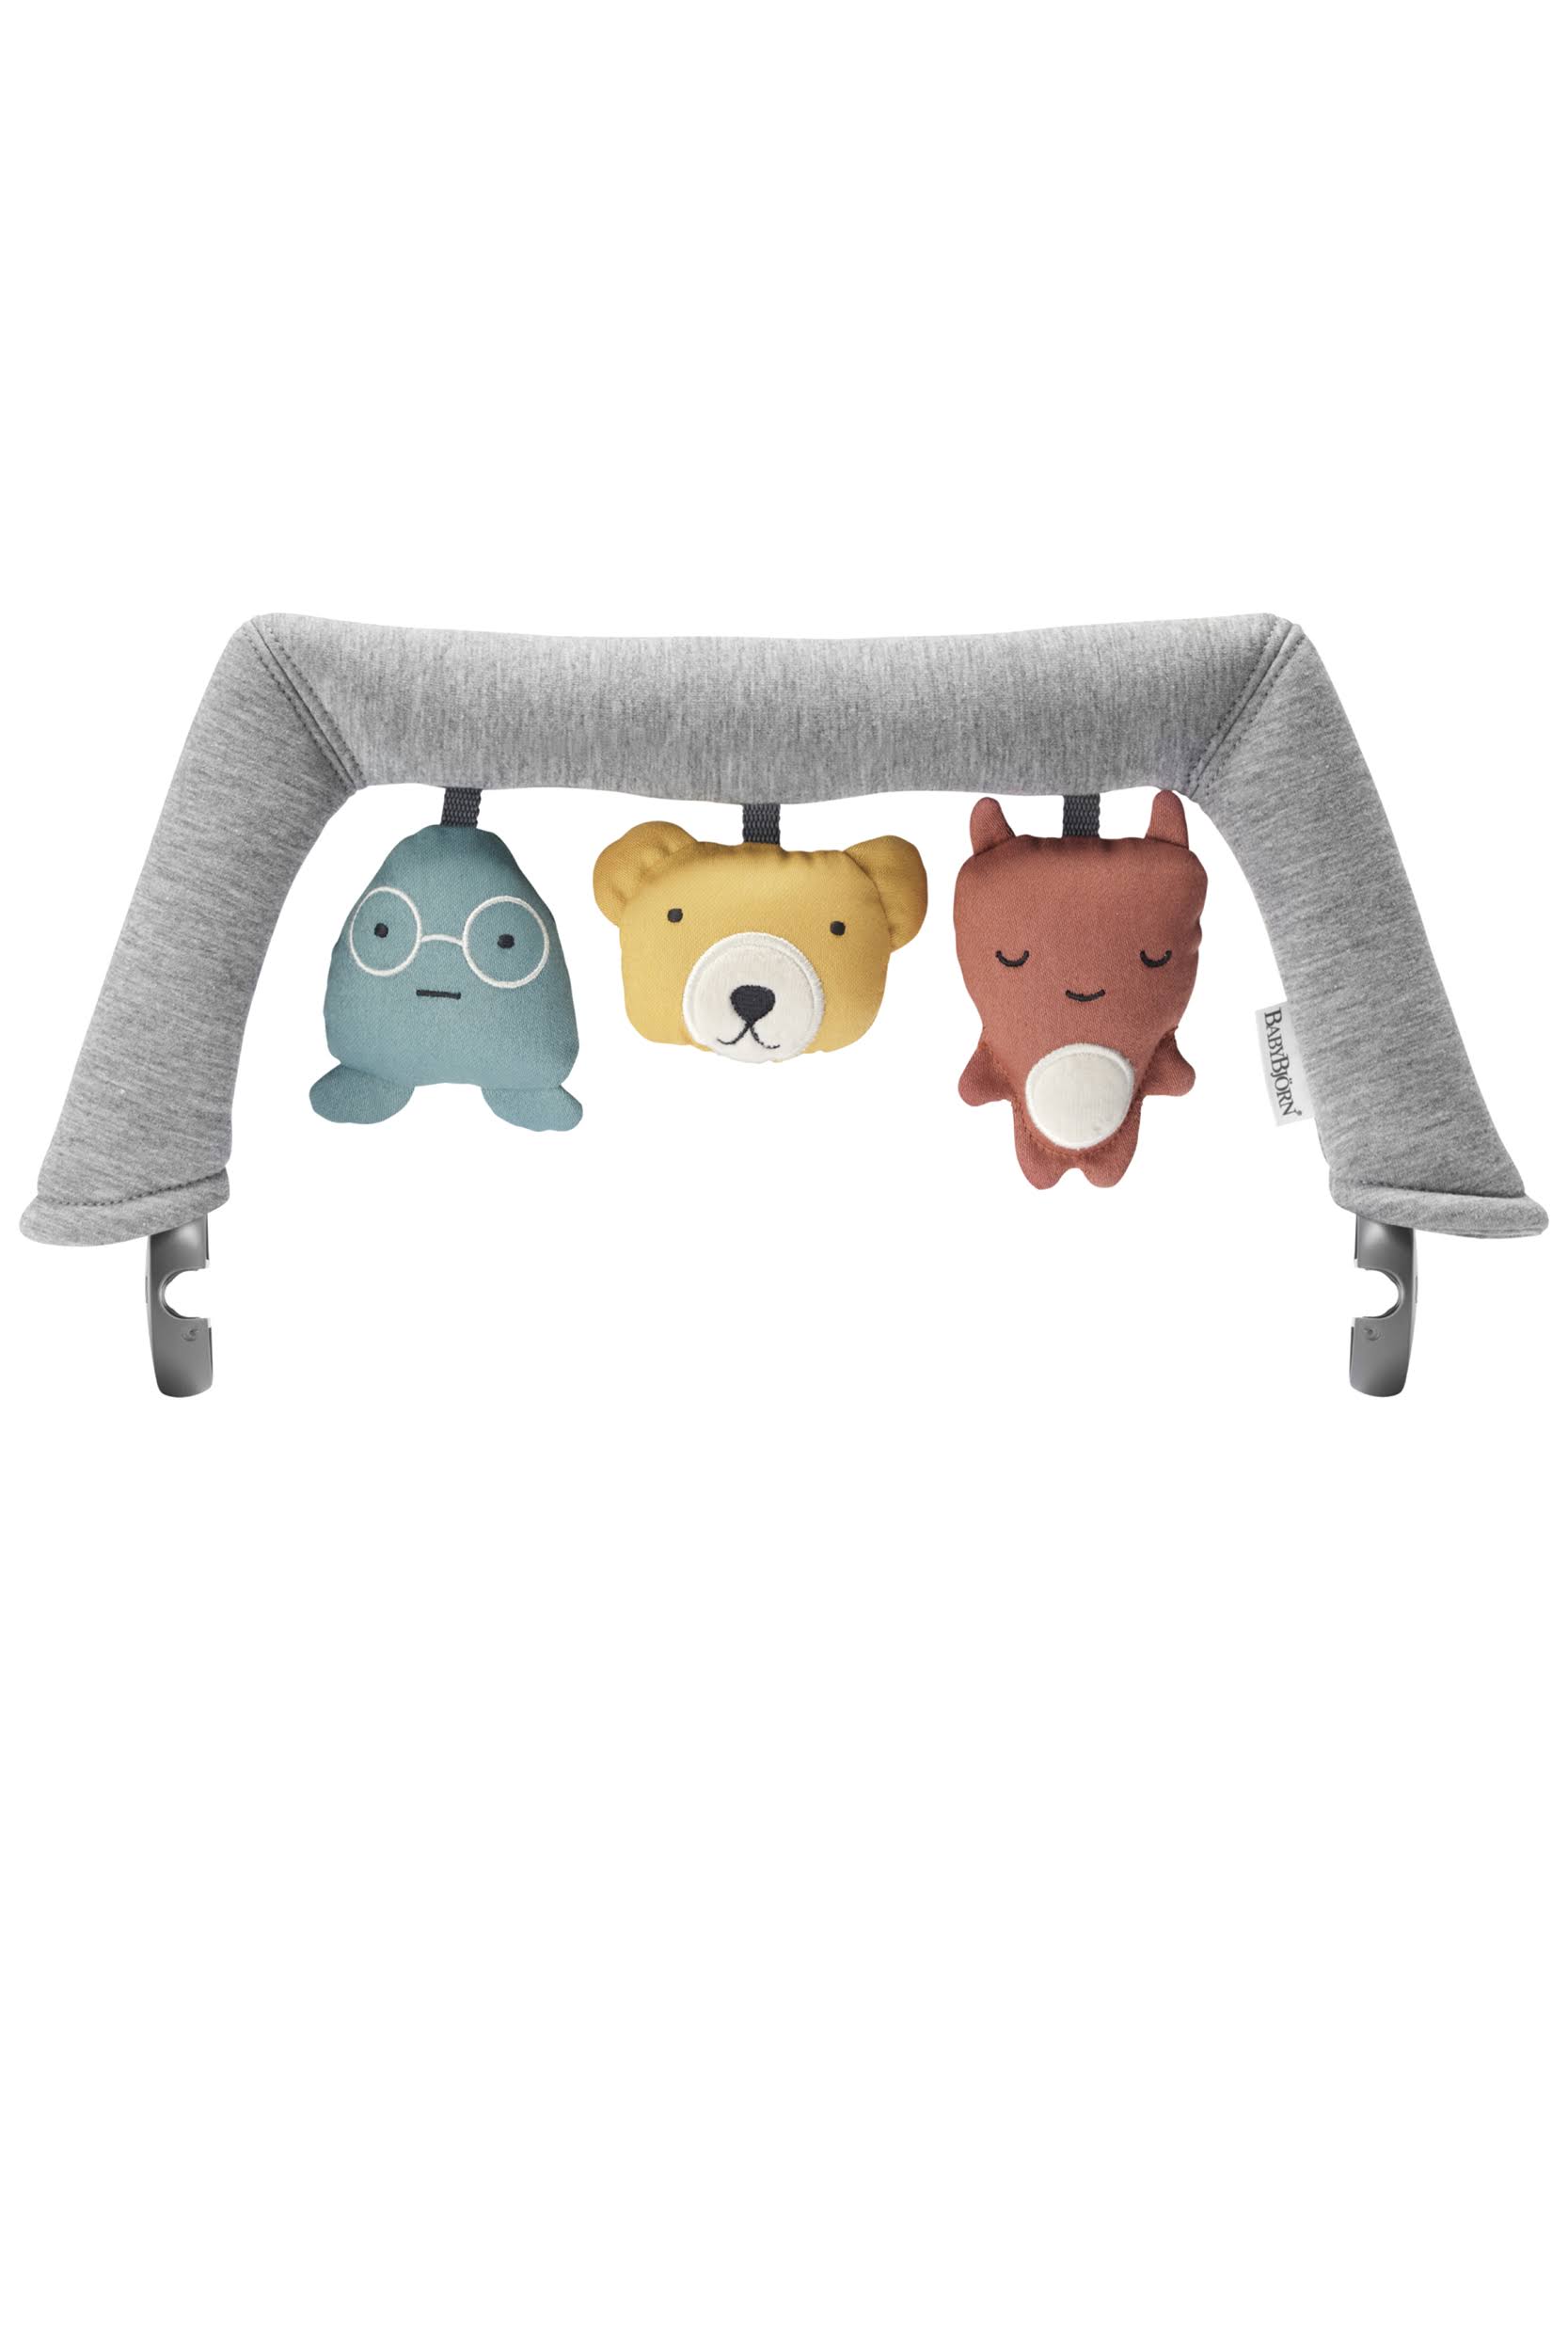 Soft Friends Bouncer Toy